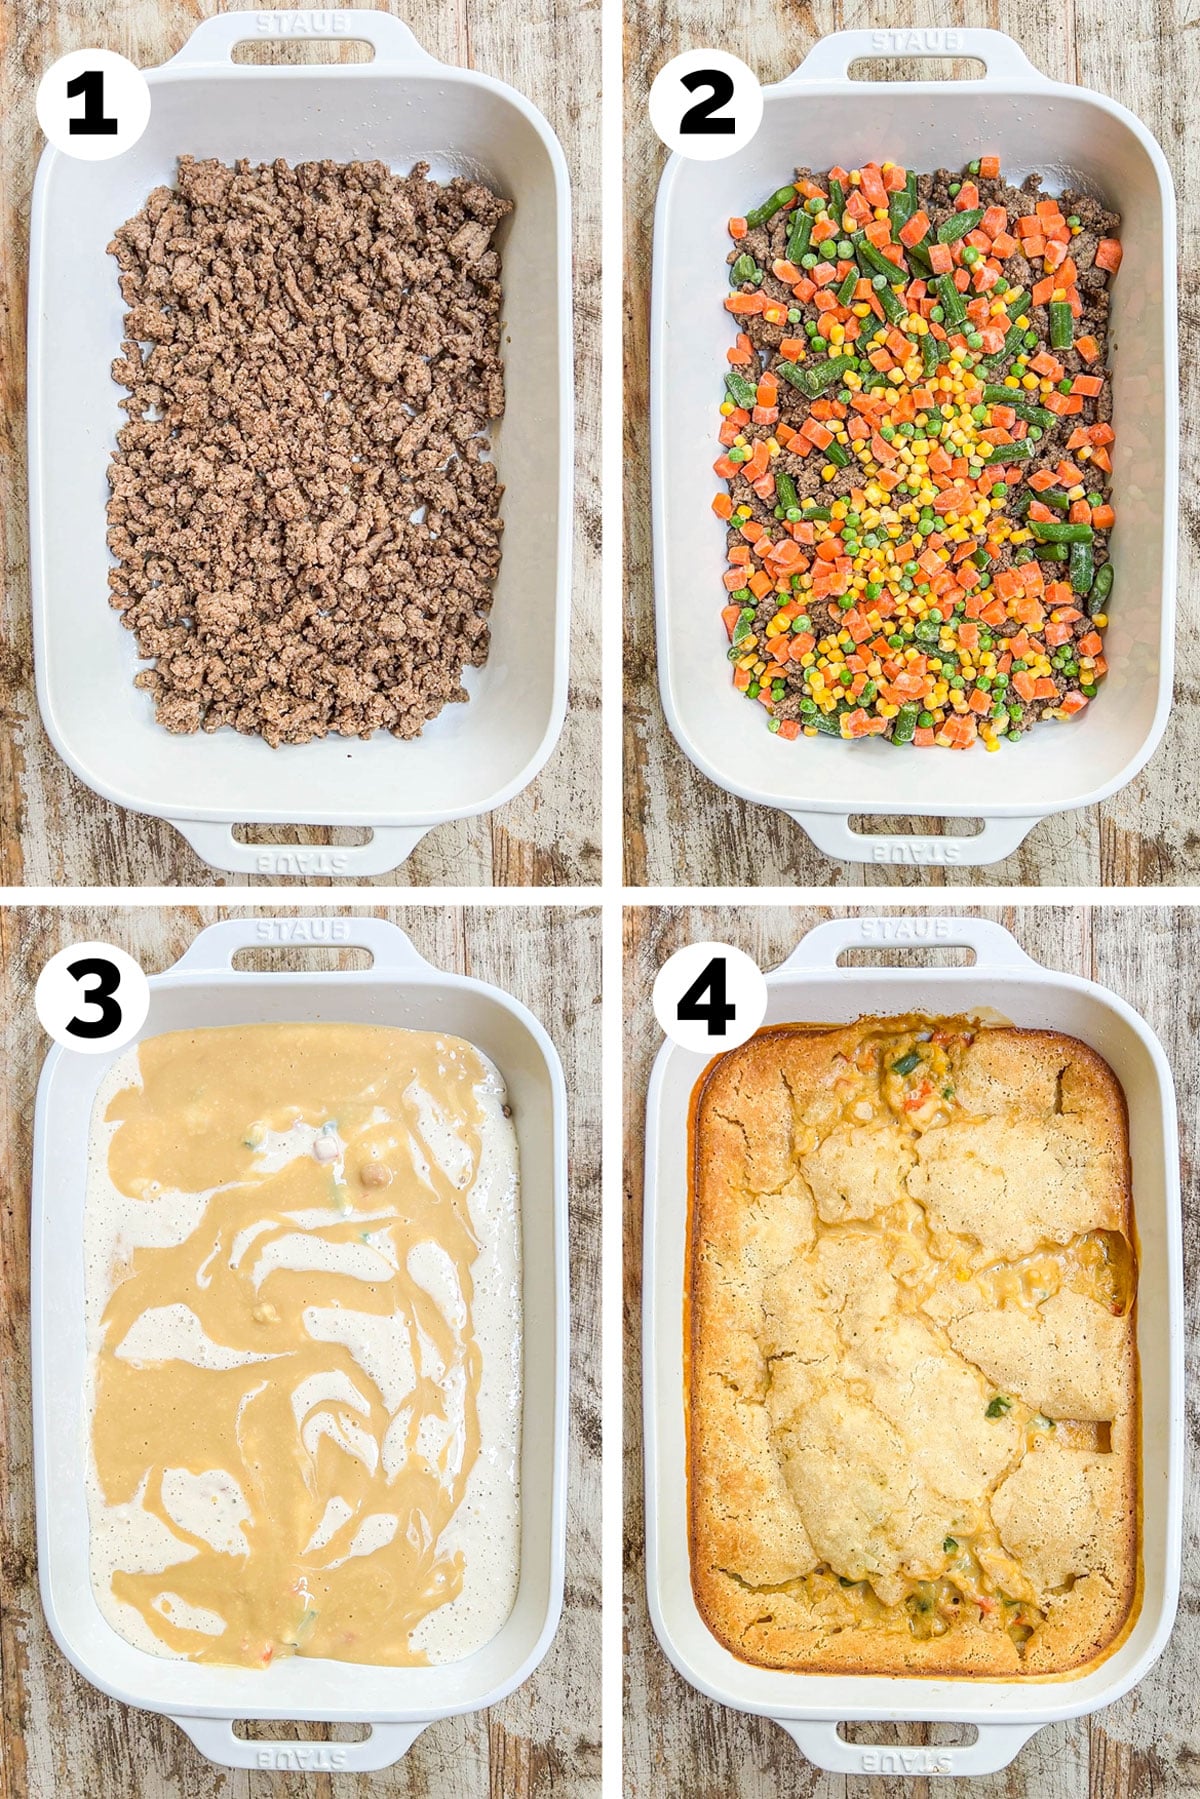 How to make ground beef cobbler: 1) Brown the beef, 2) Add the frozen vegetables, 3) Add the biscuit mix and soup mixture, 4) Bake and serve